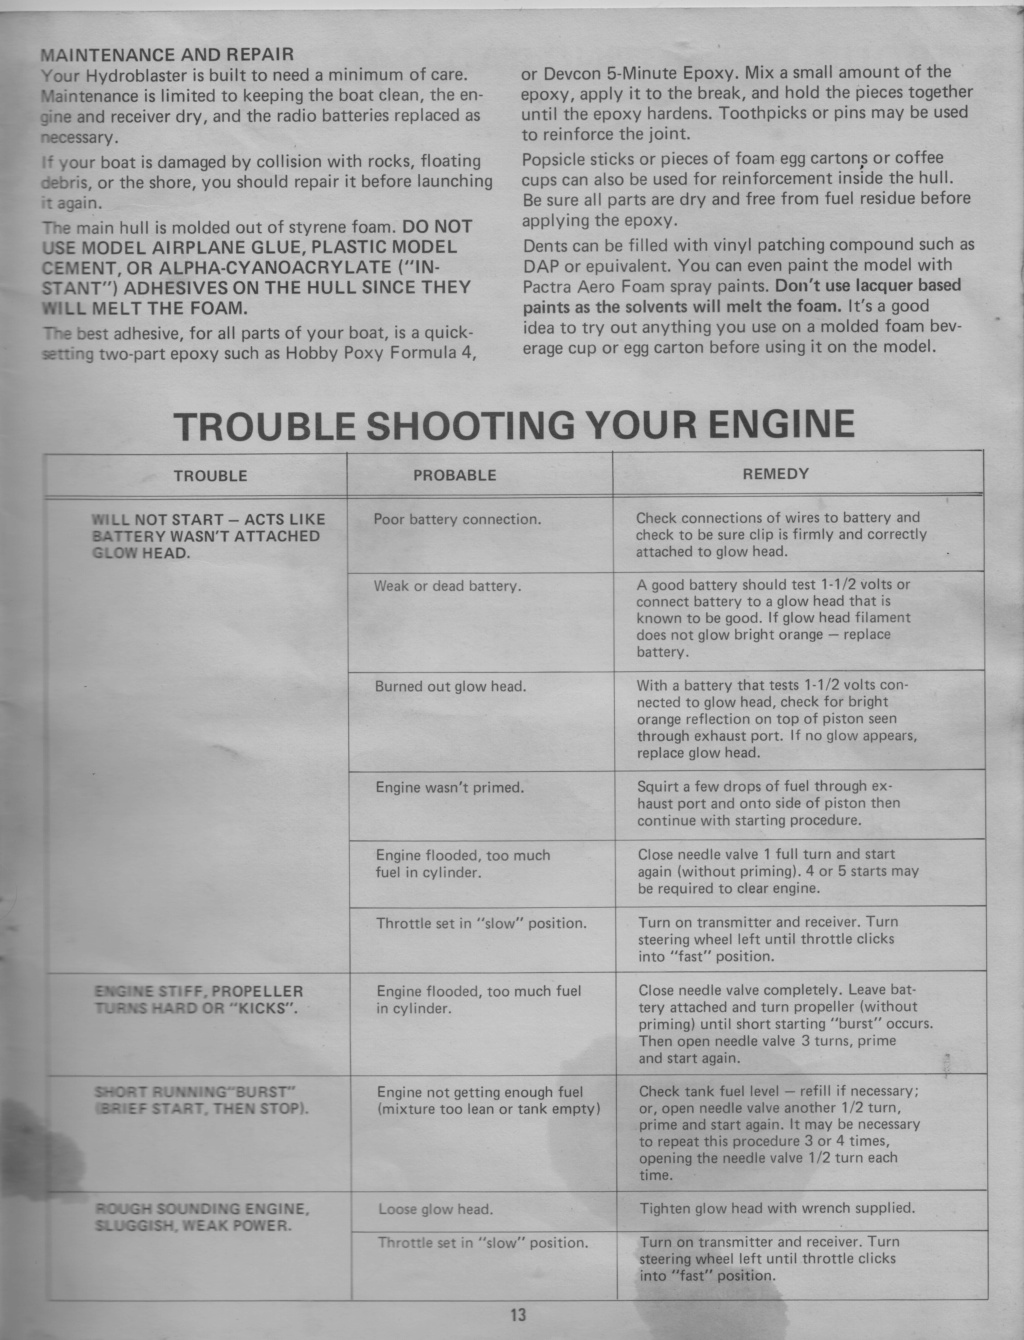 Hydro Blaster pictures and manual scans . Hydro_22